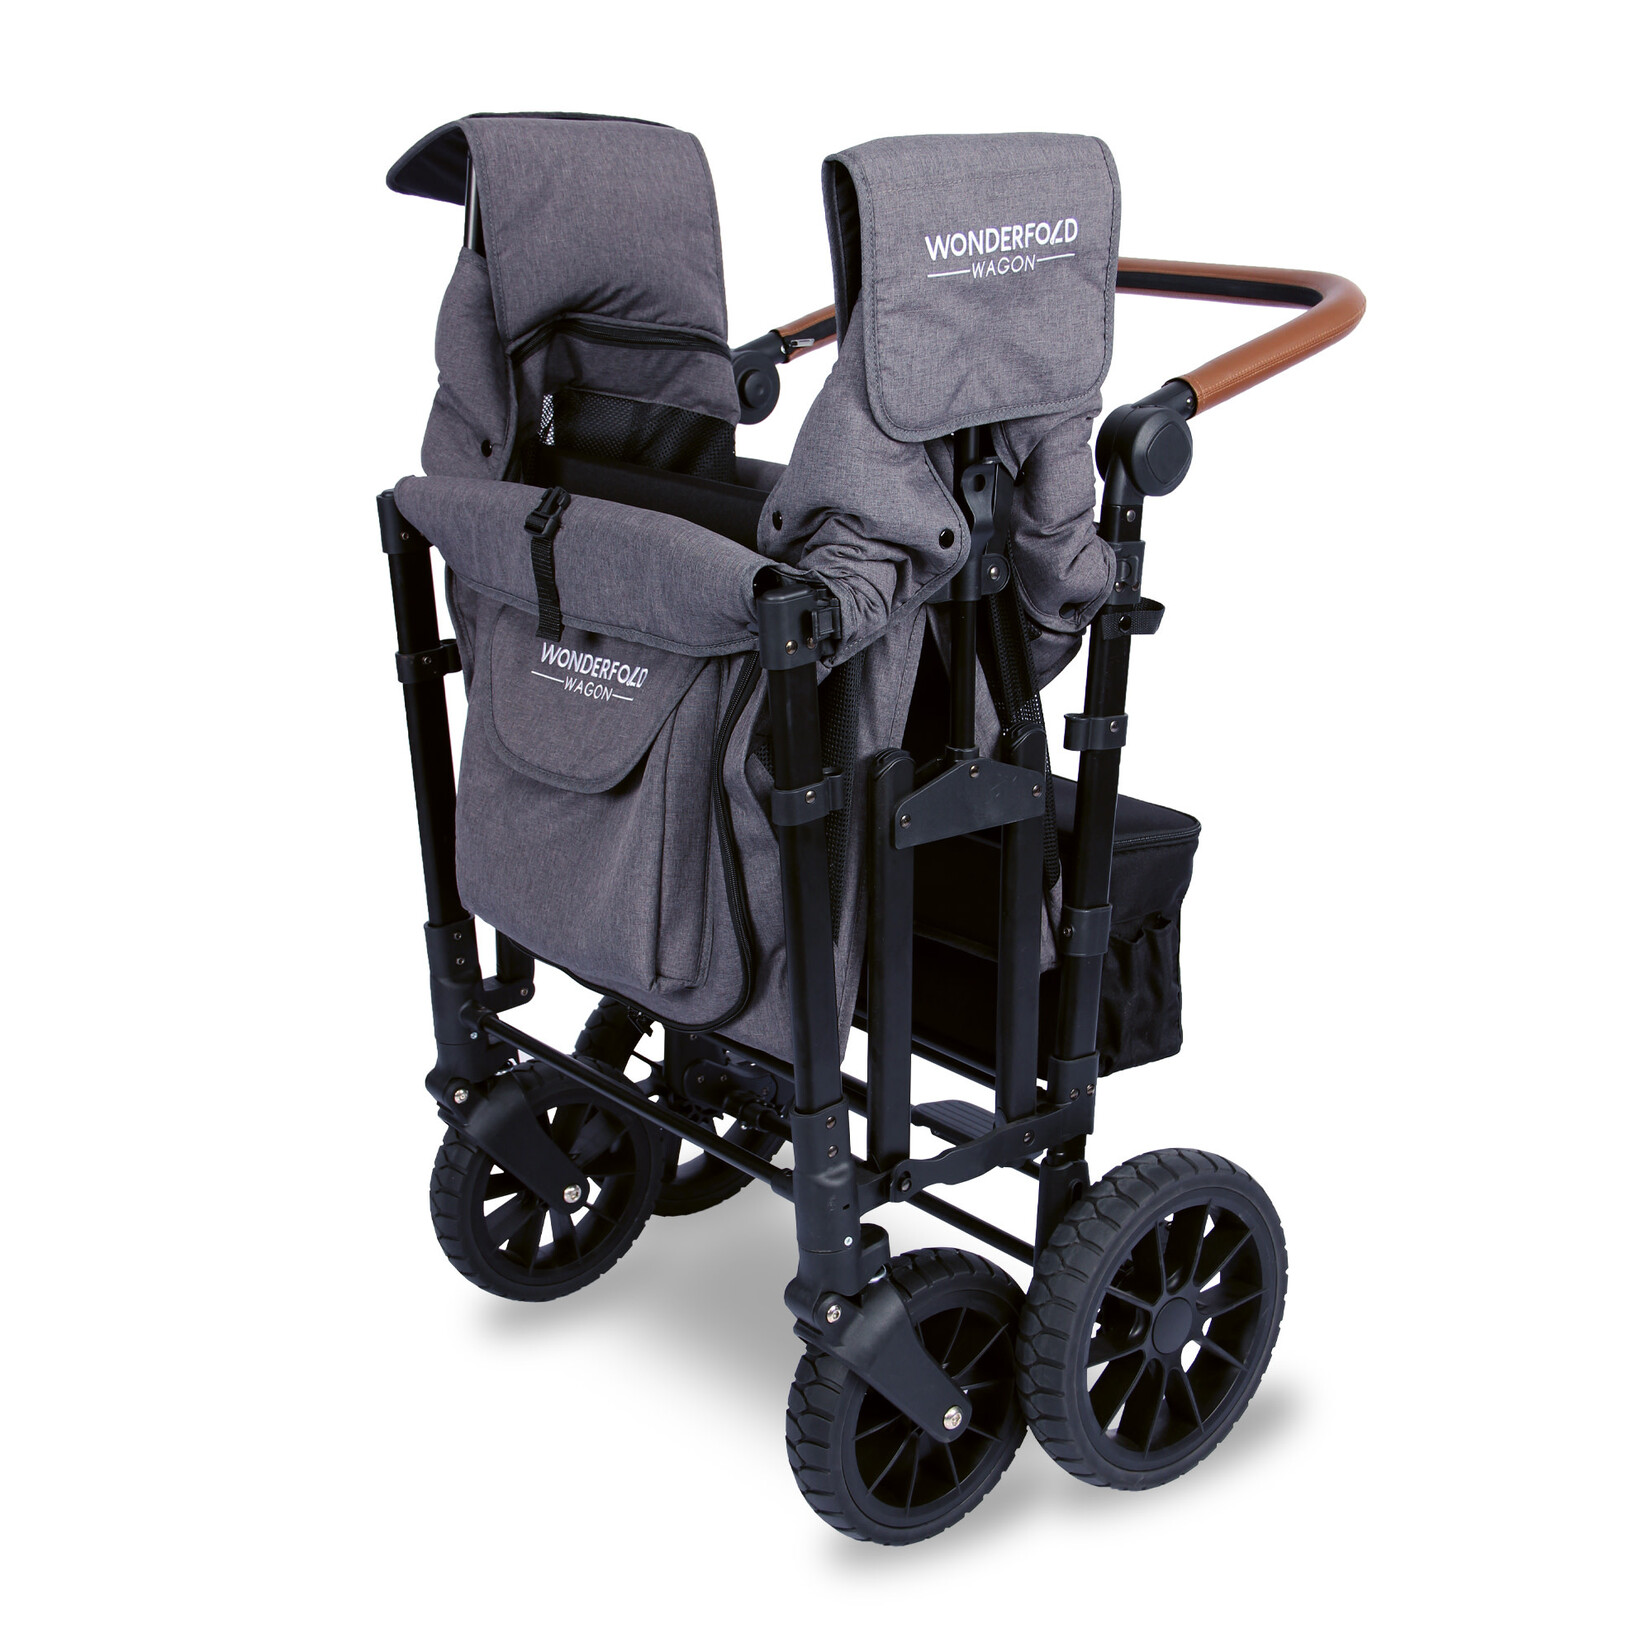 Wonderfold W4 Luxe - Quad Wagon - Charcoal Grey with Black Frame